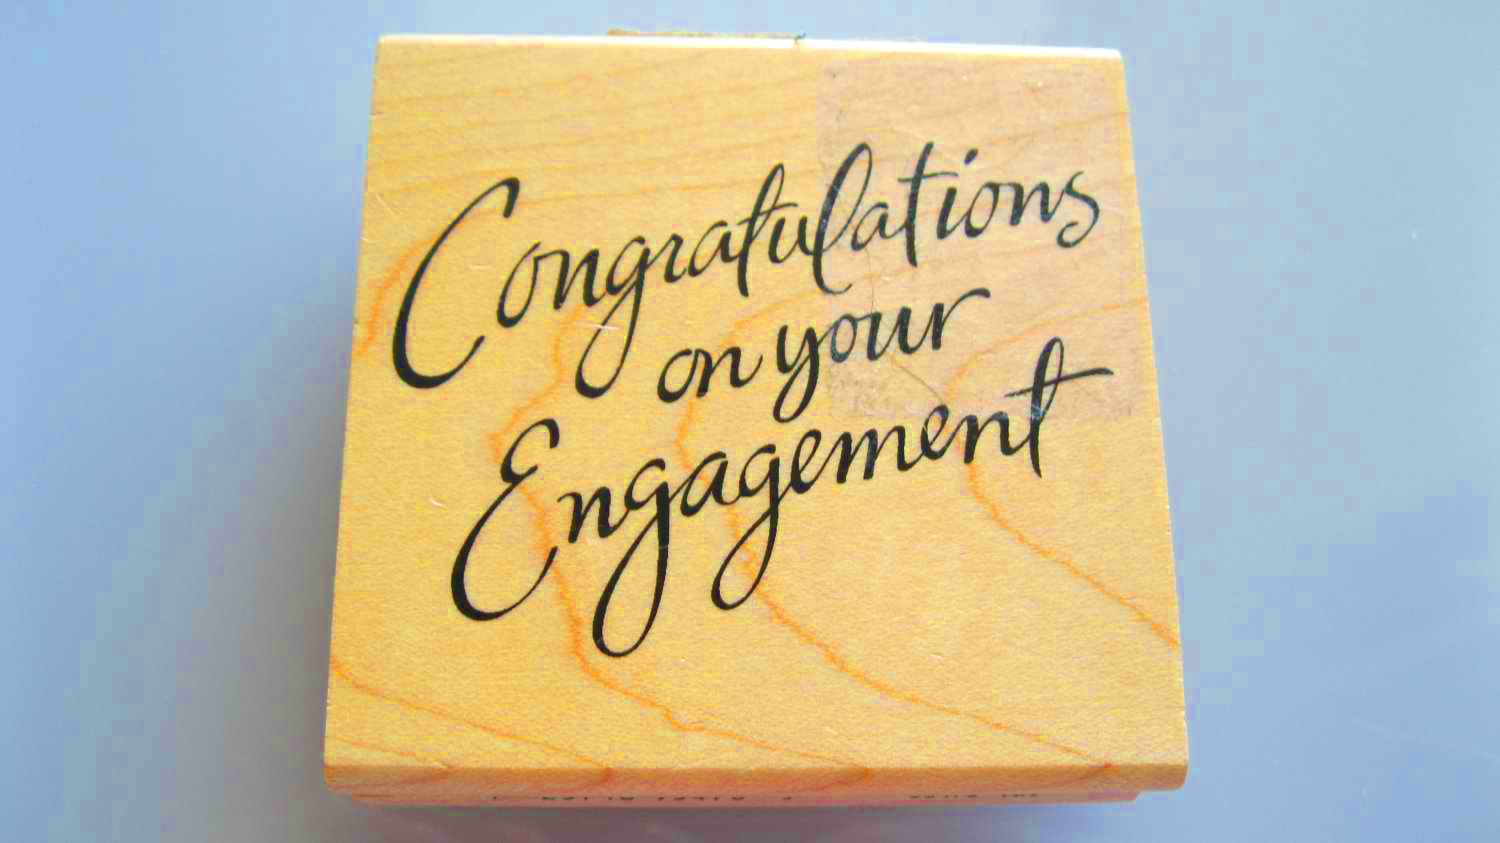 Congratulations On Your Engagement Facebook Cover Photo